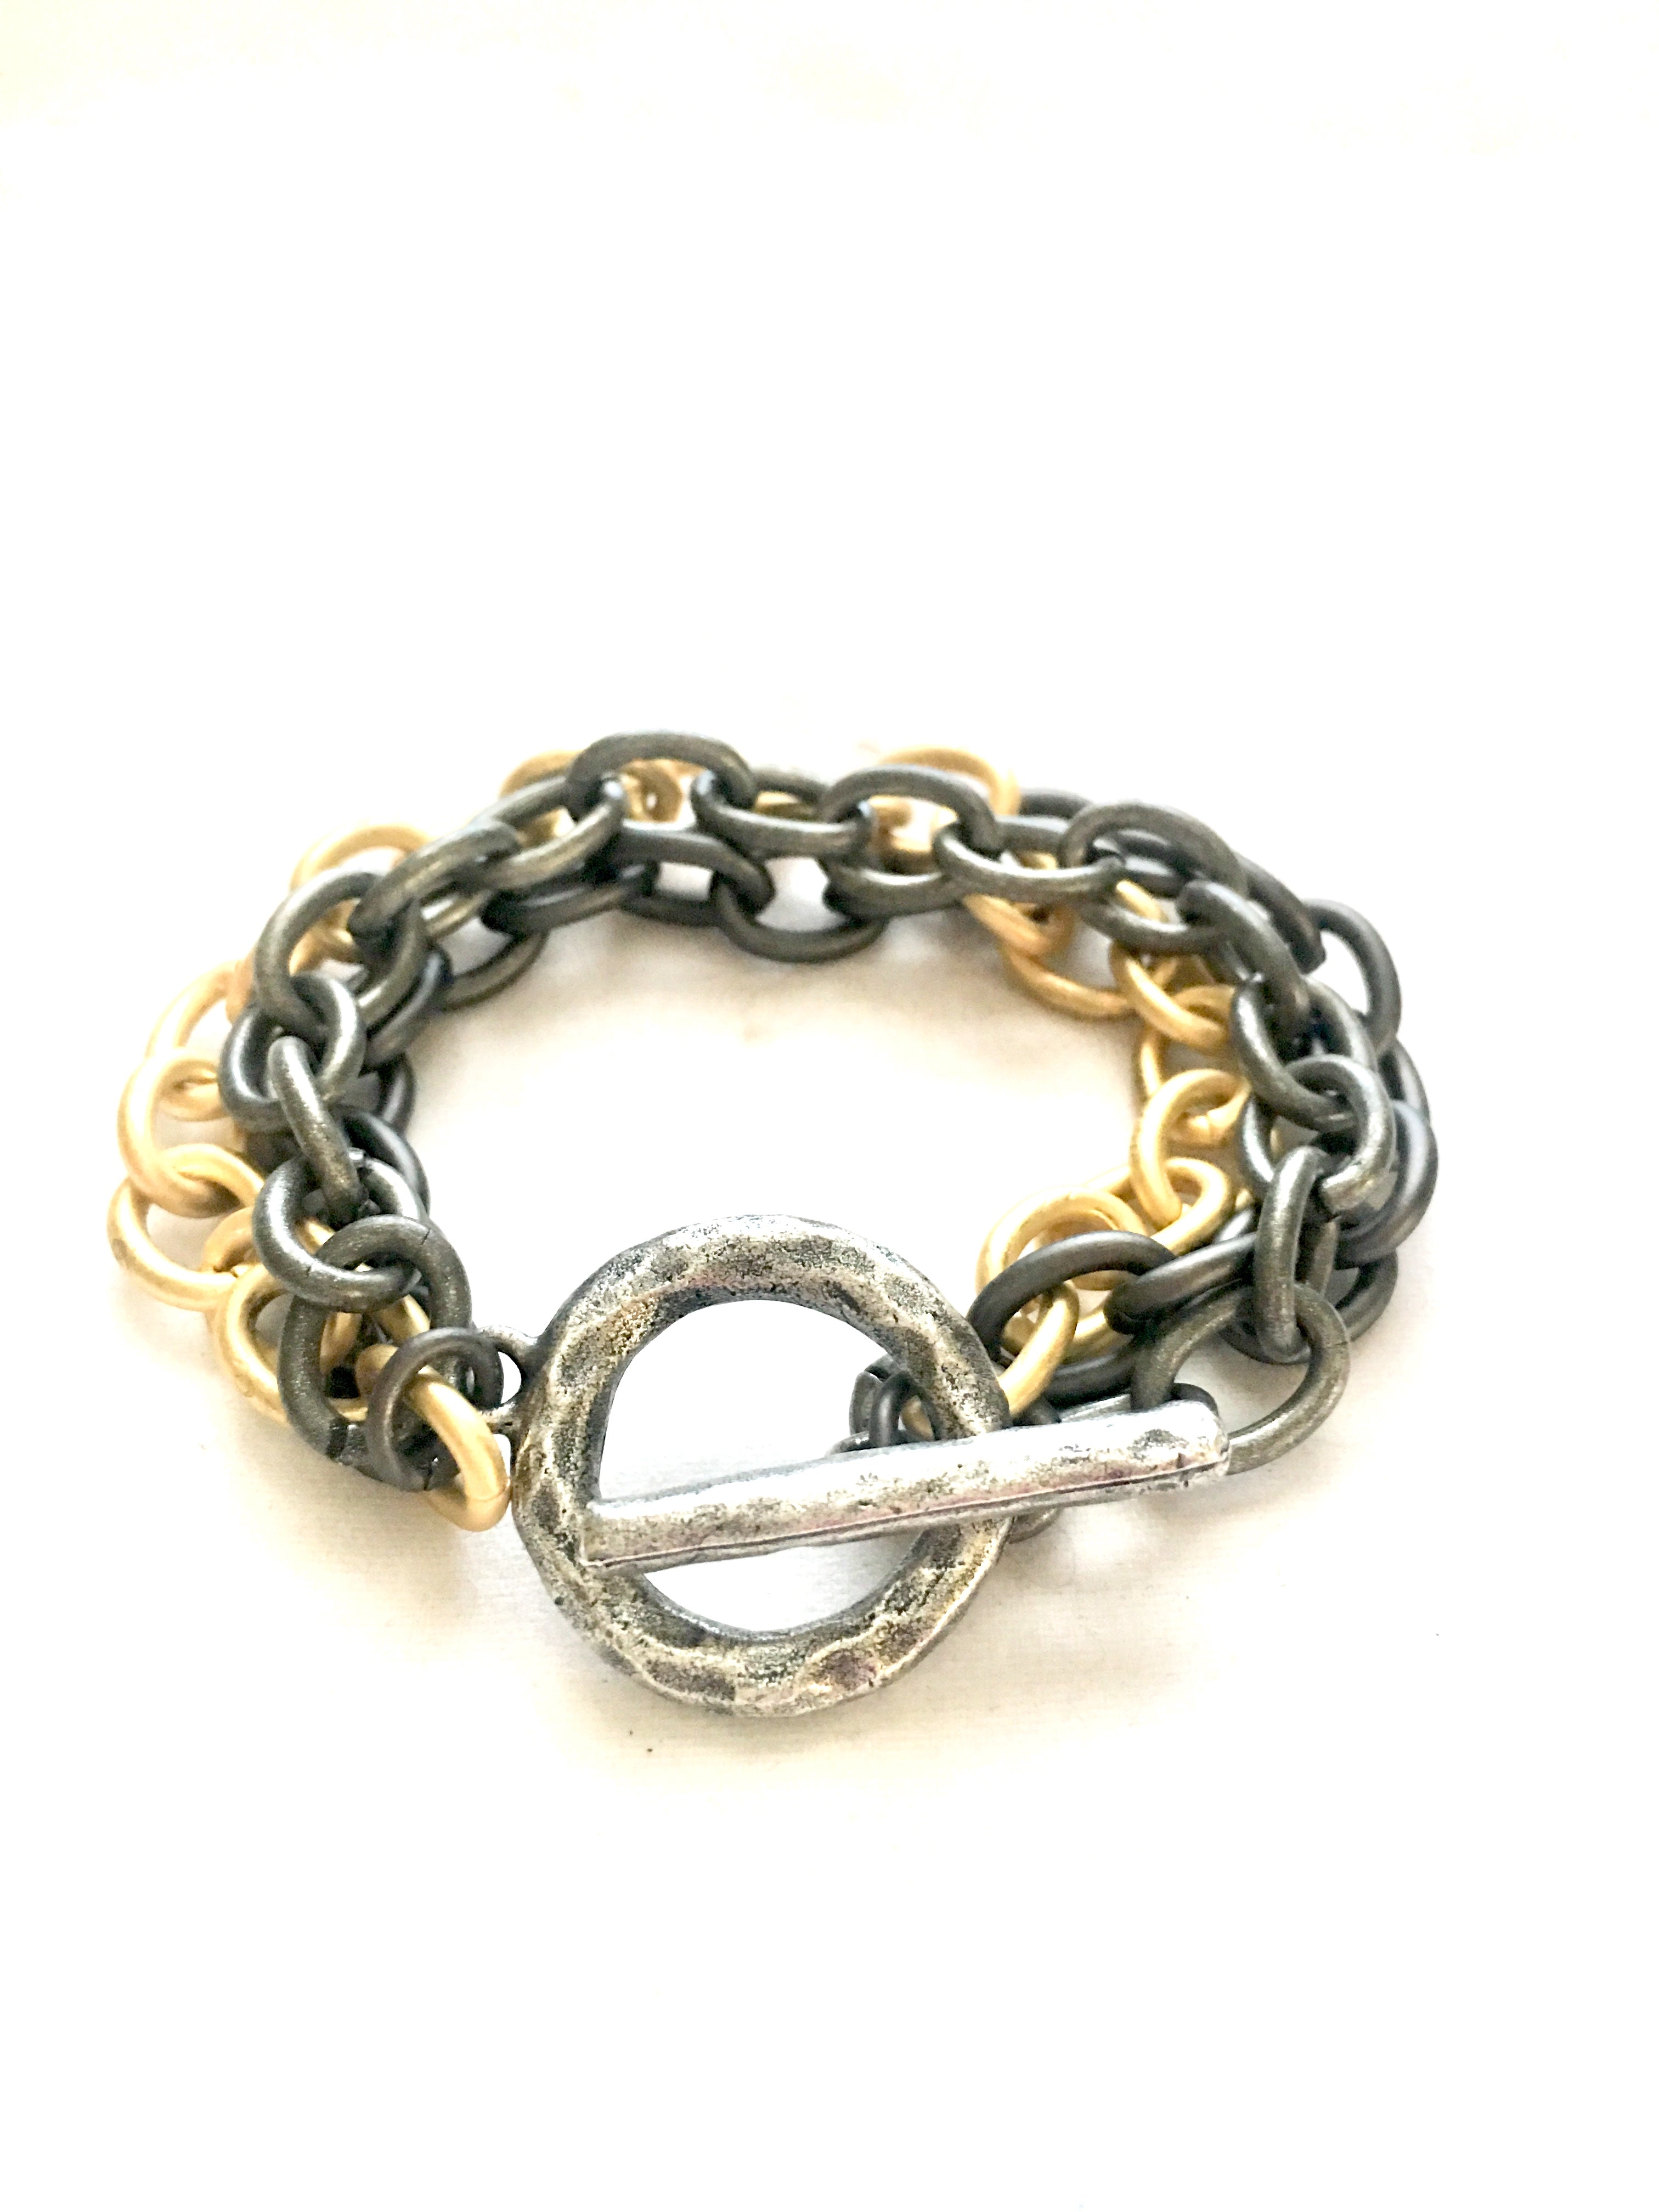 Bennett - bracelet with mixed metals and toggle